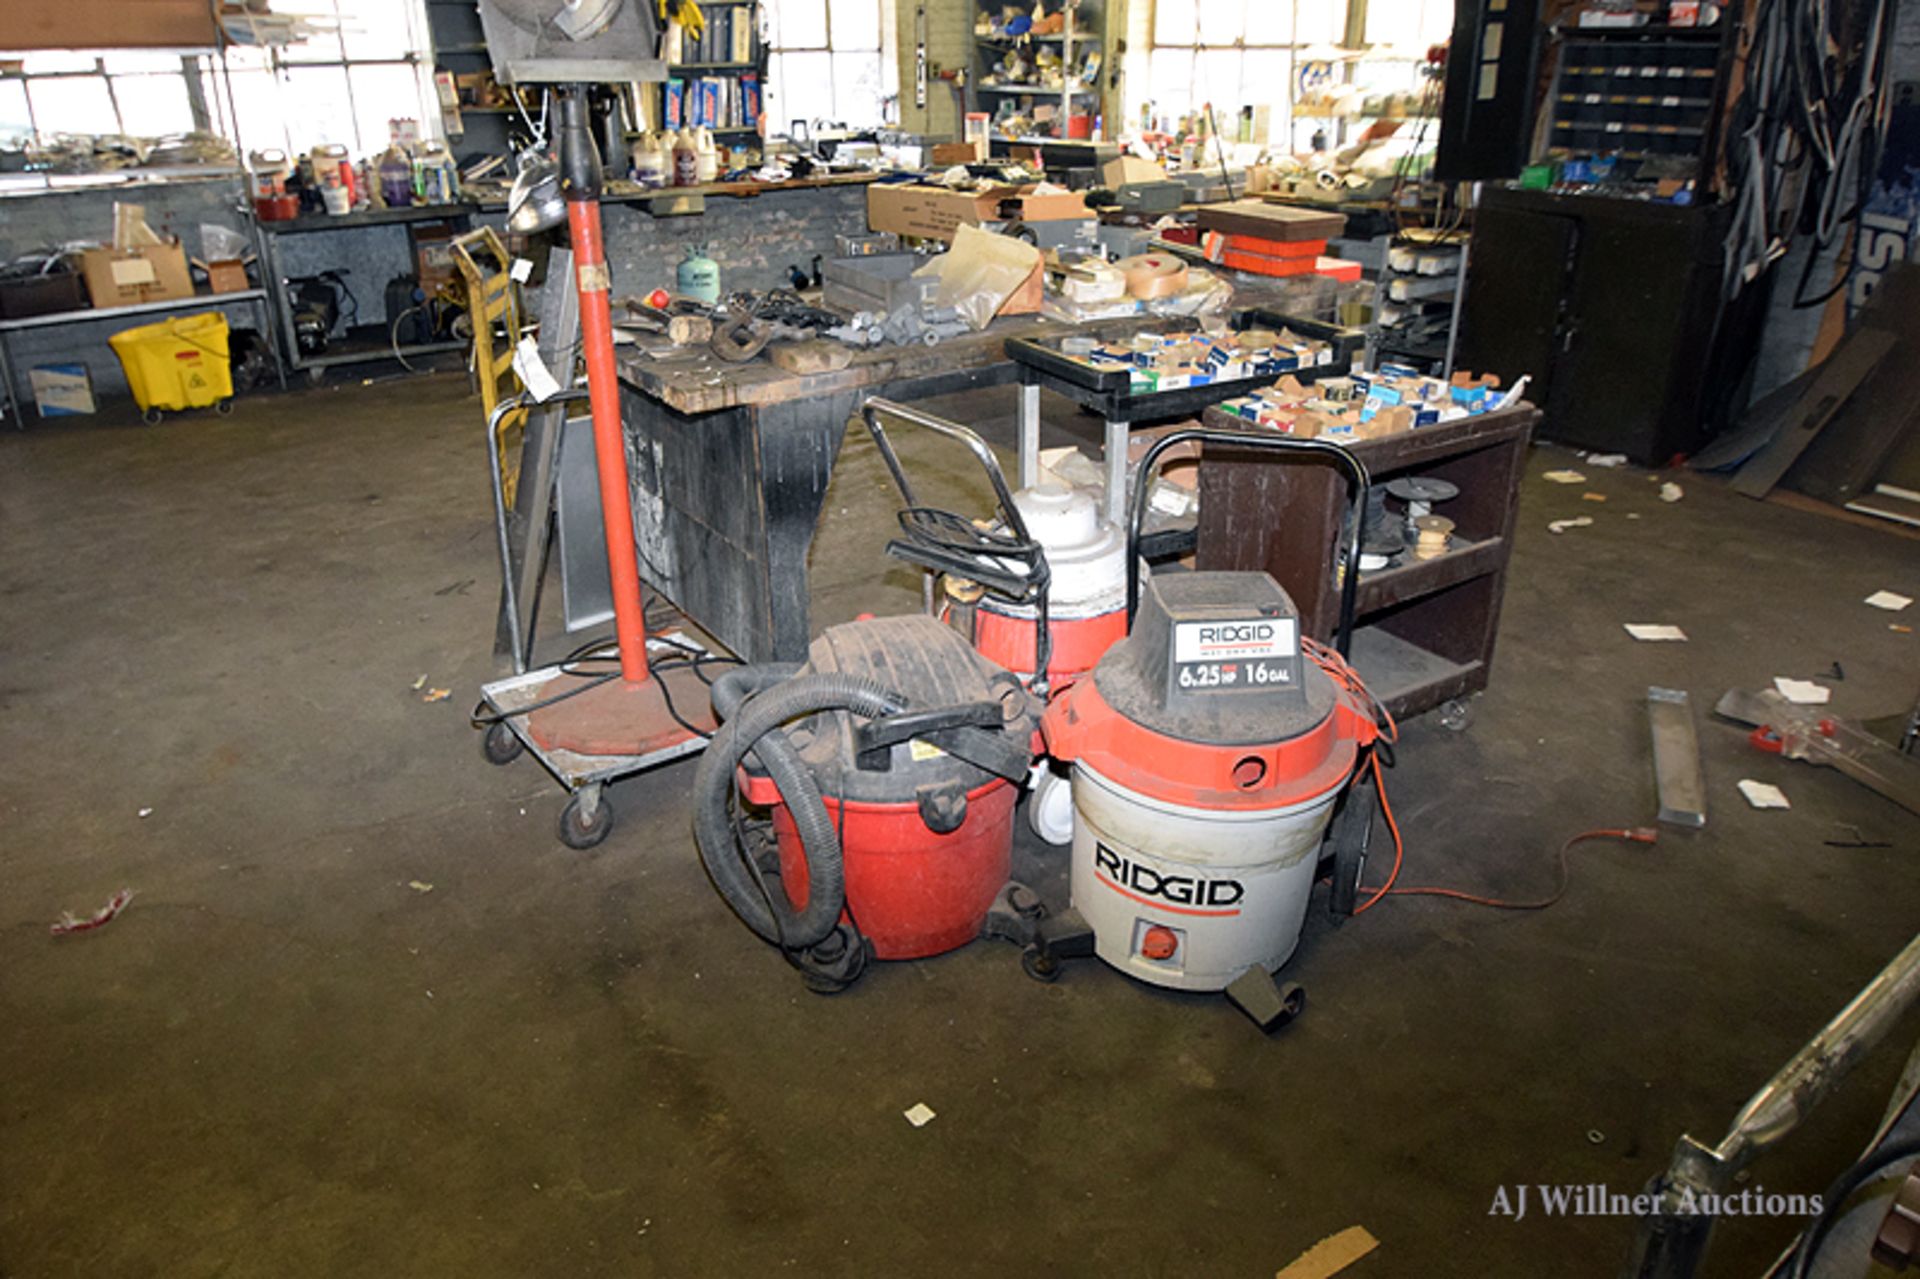 Contents of Workshop; Tools, Vacuums, Parts, Etc. - Image 10 of 13